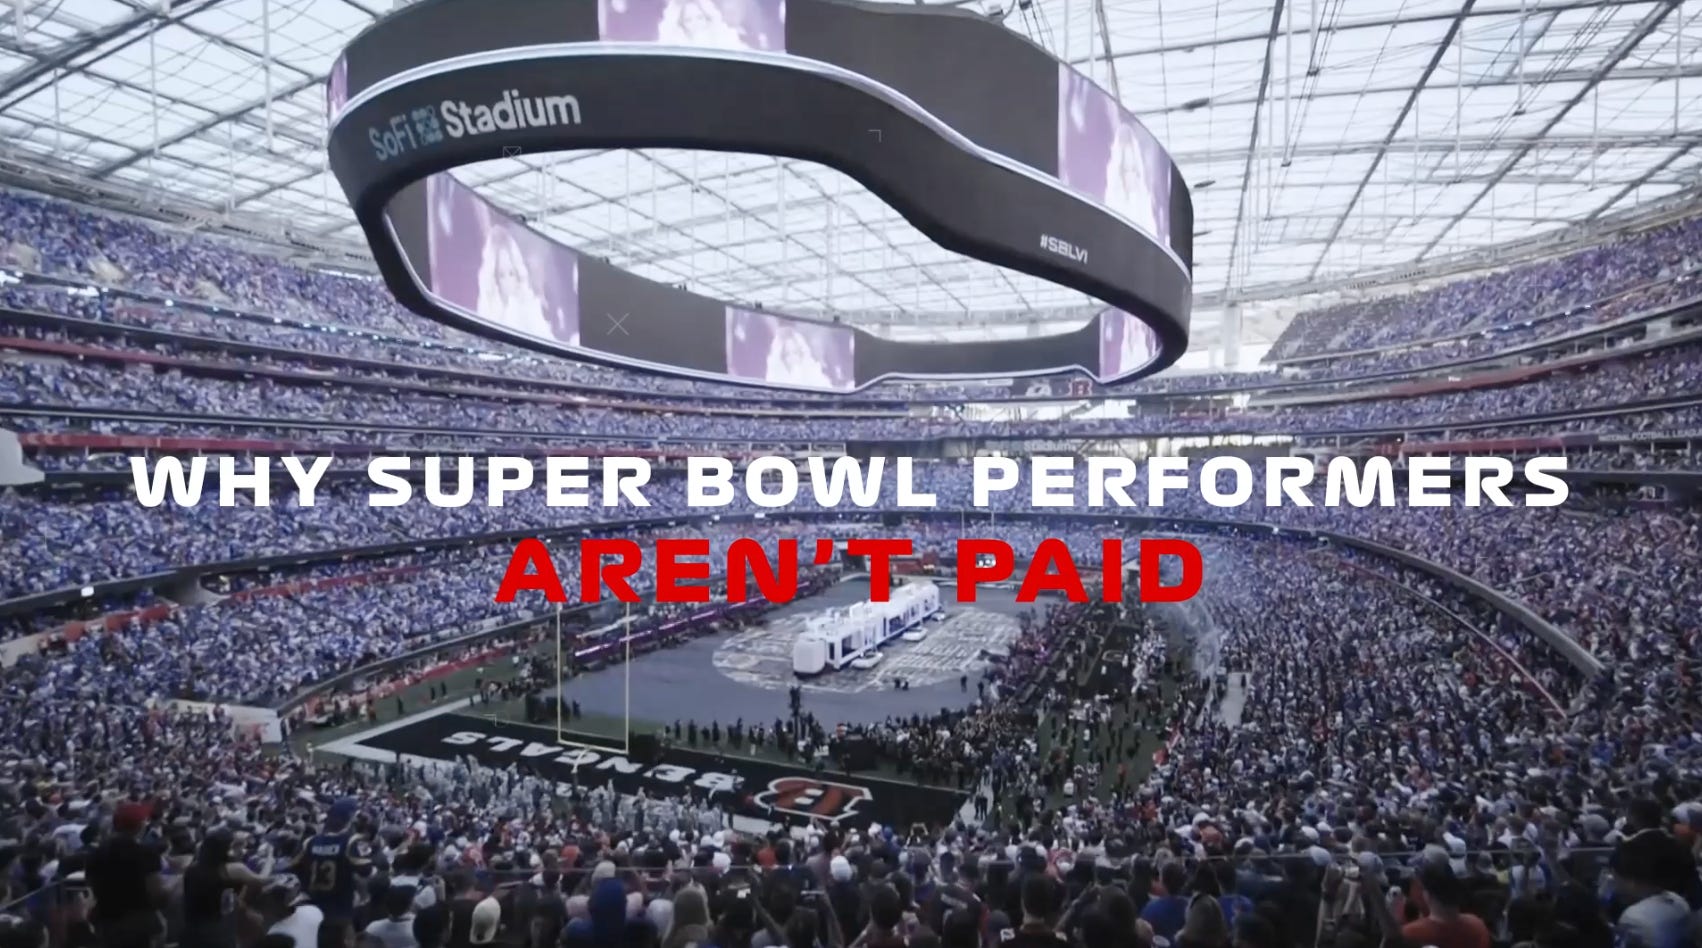 How Much Do Players Get Paid for the Super Bowl?